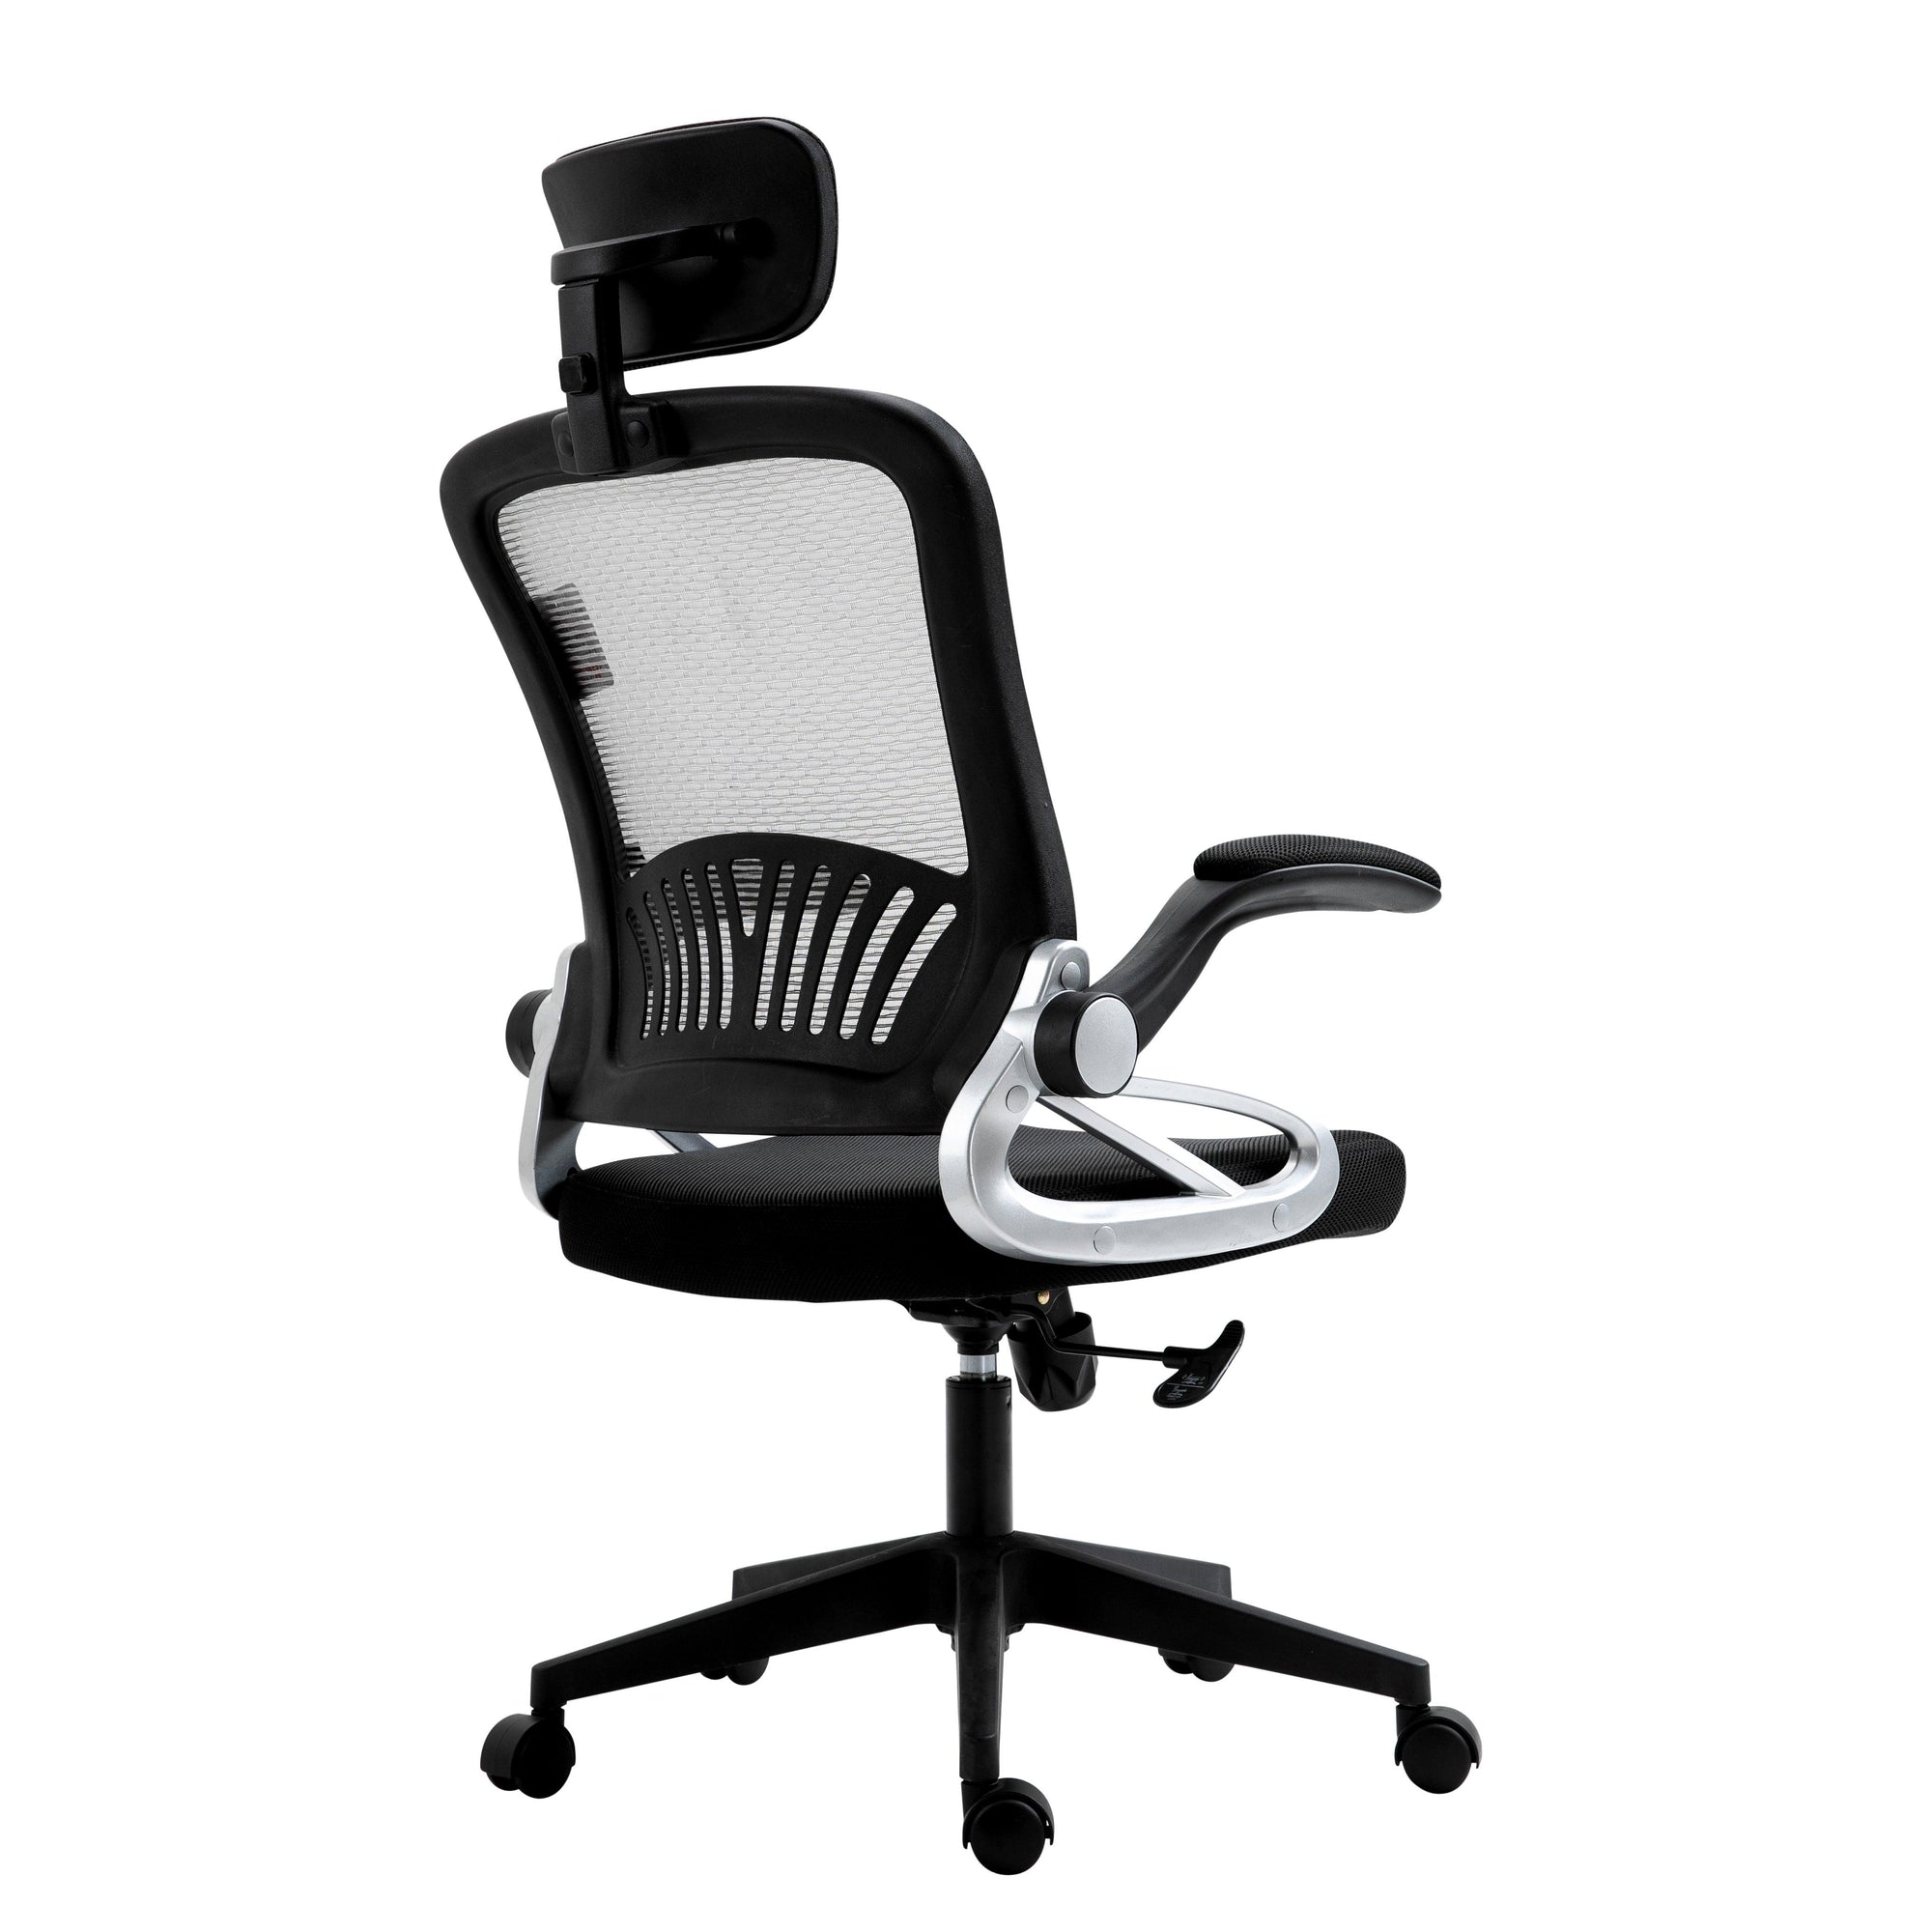 Mesh High Back Extra Padded Swivel Office Chair with Head Support & Adjustable Arms, Grey